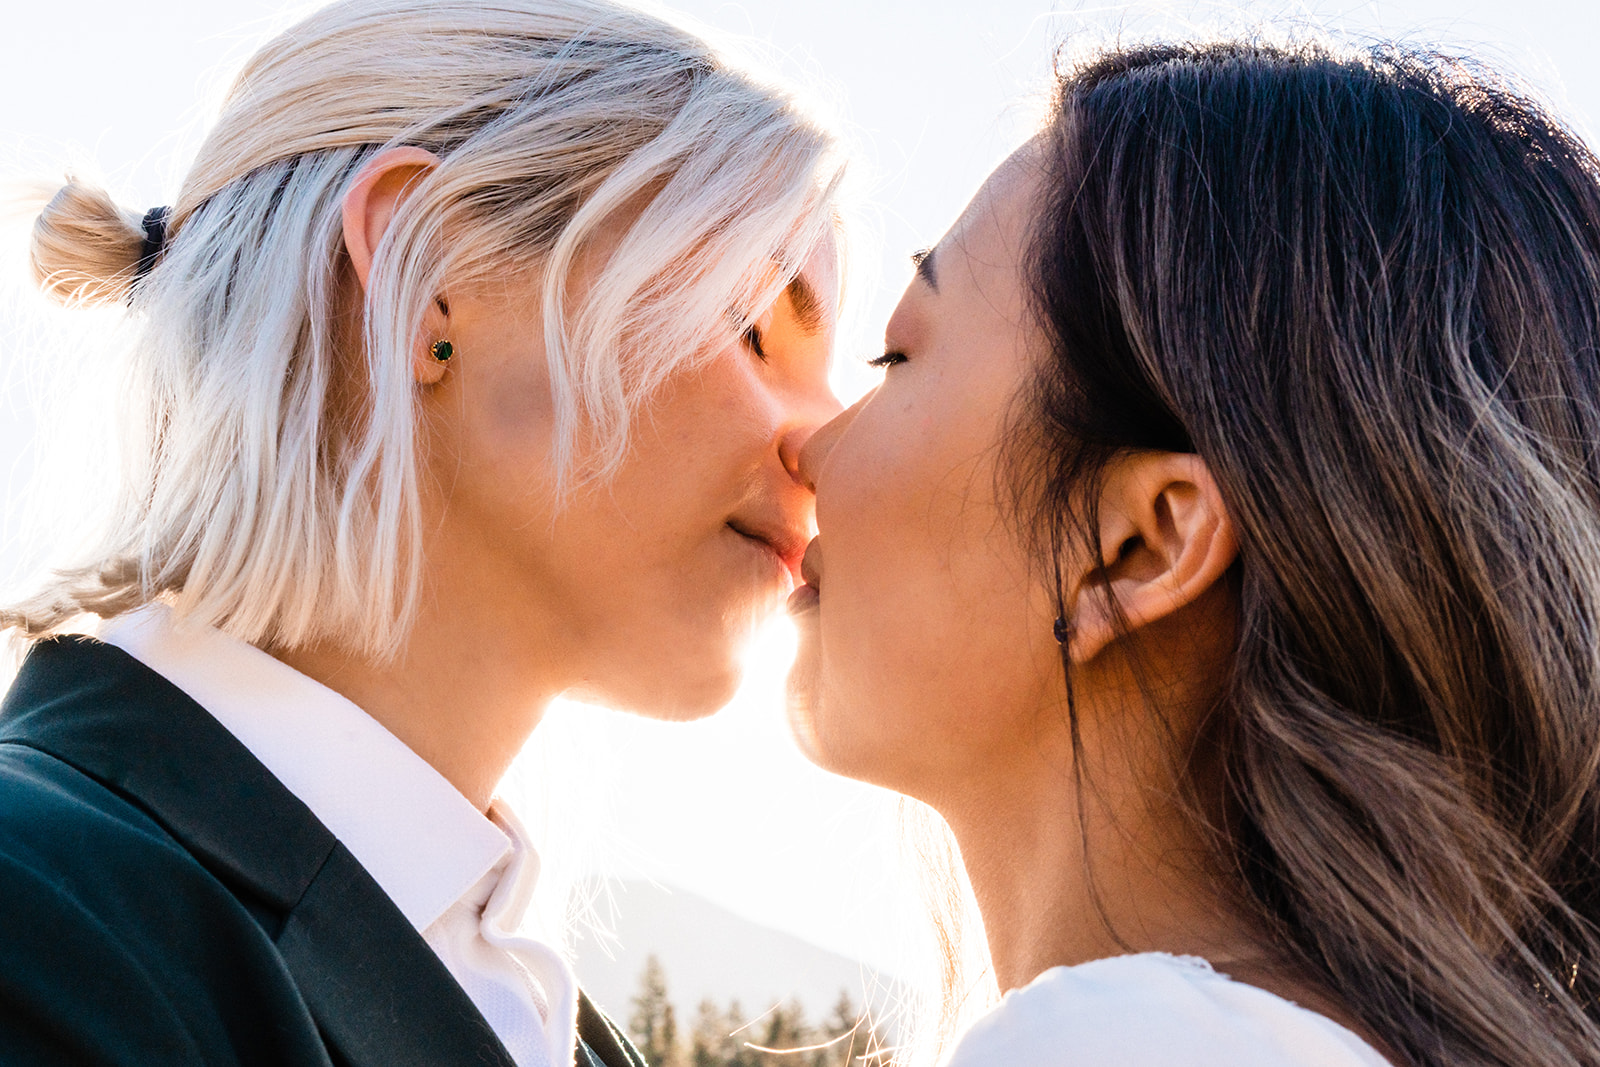 A beautiful lesbian elopement day at Crested Butte in Colorado